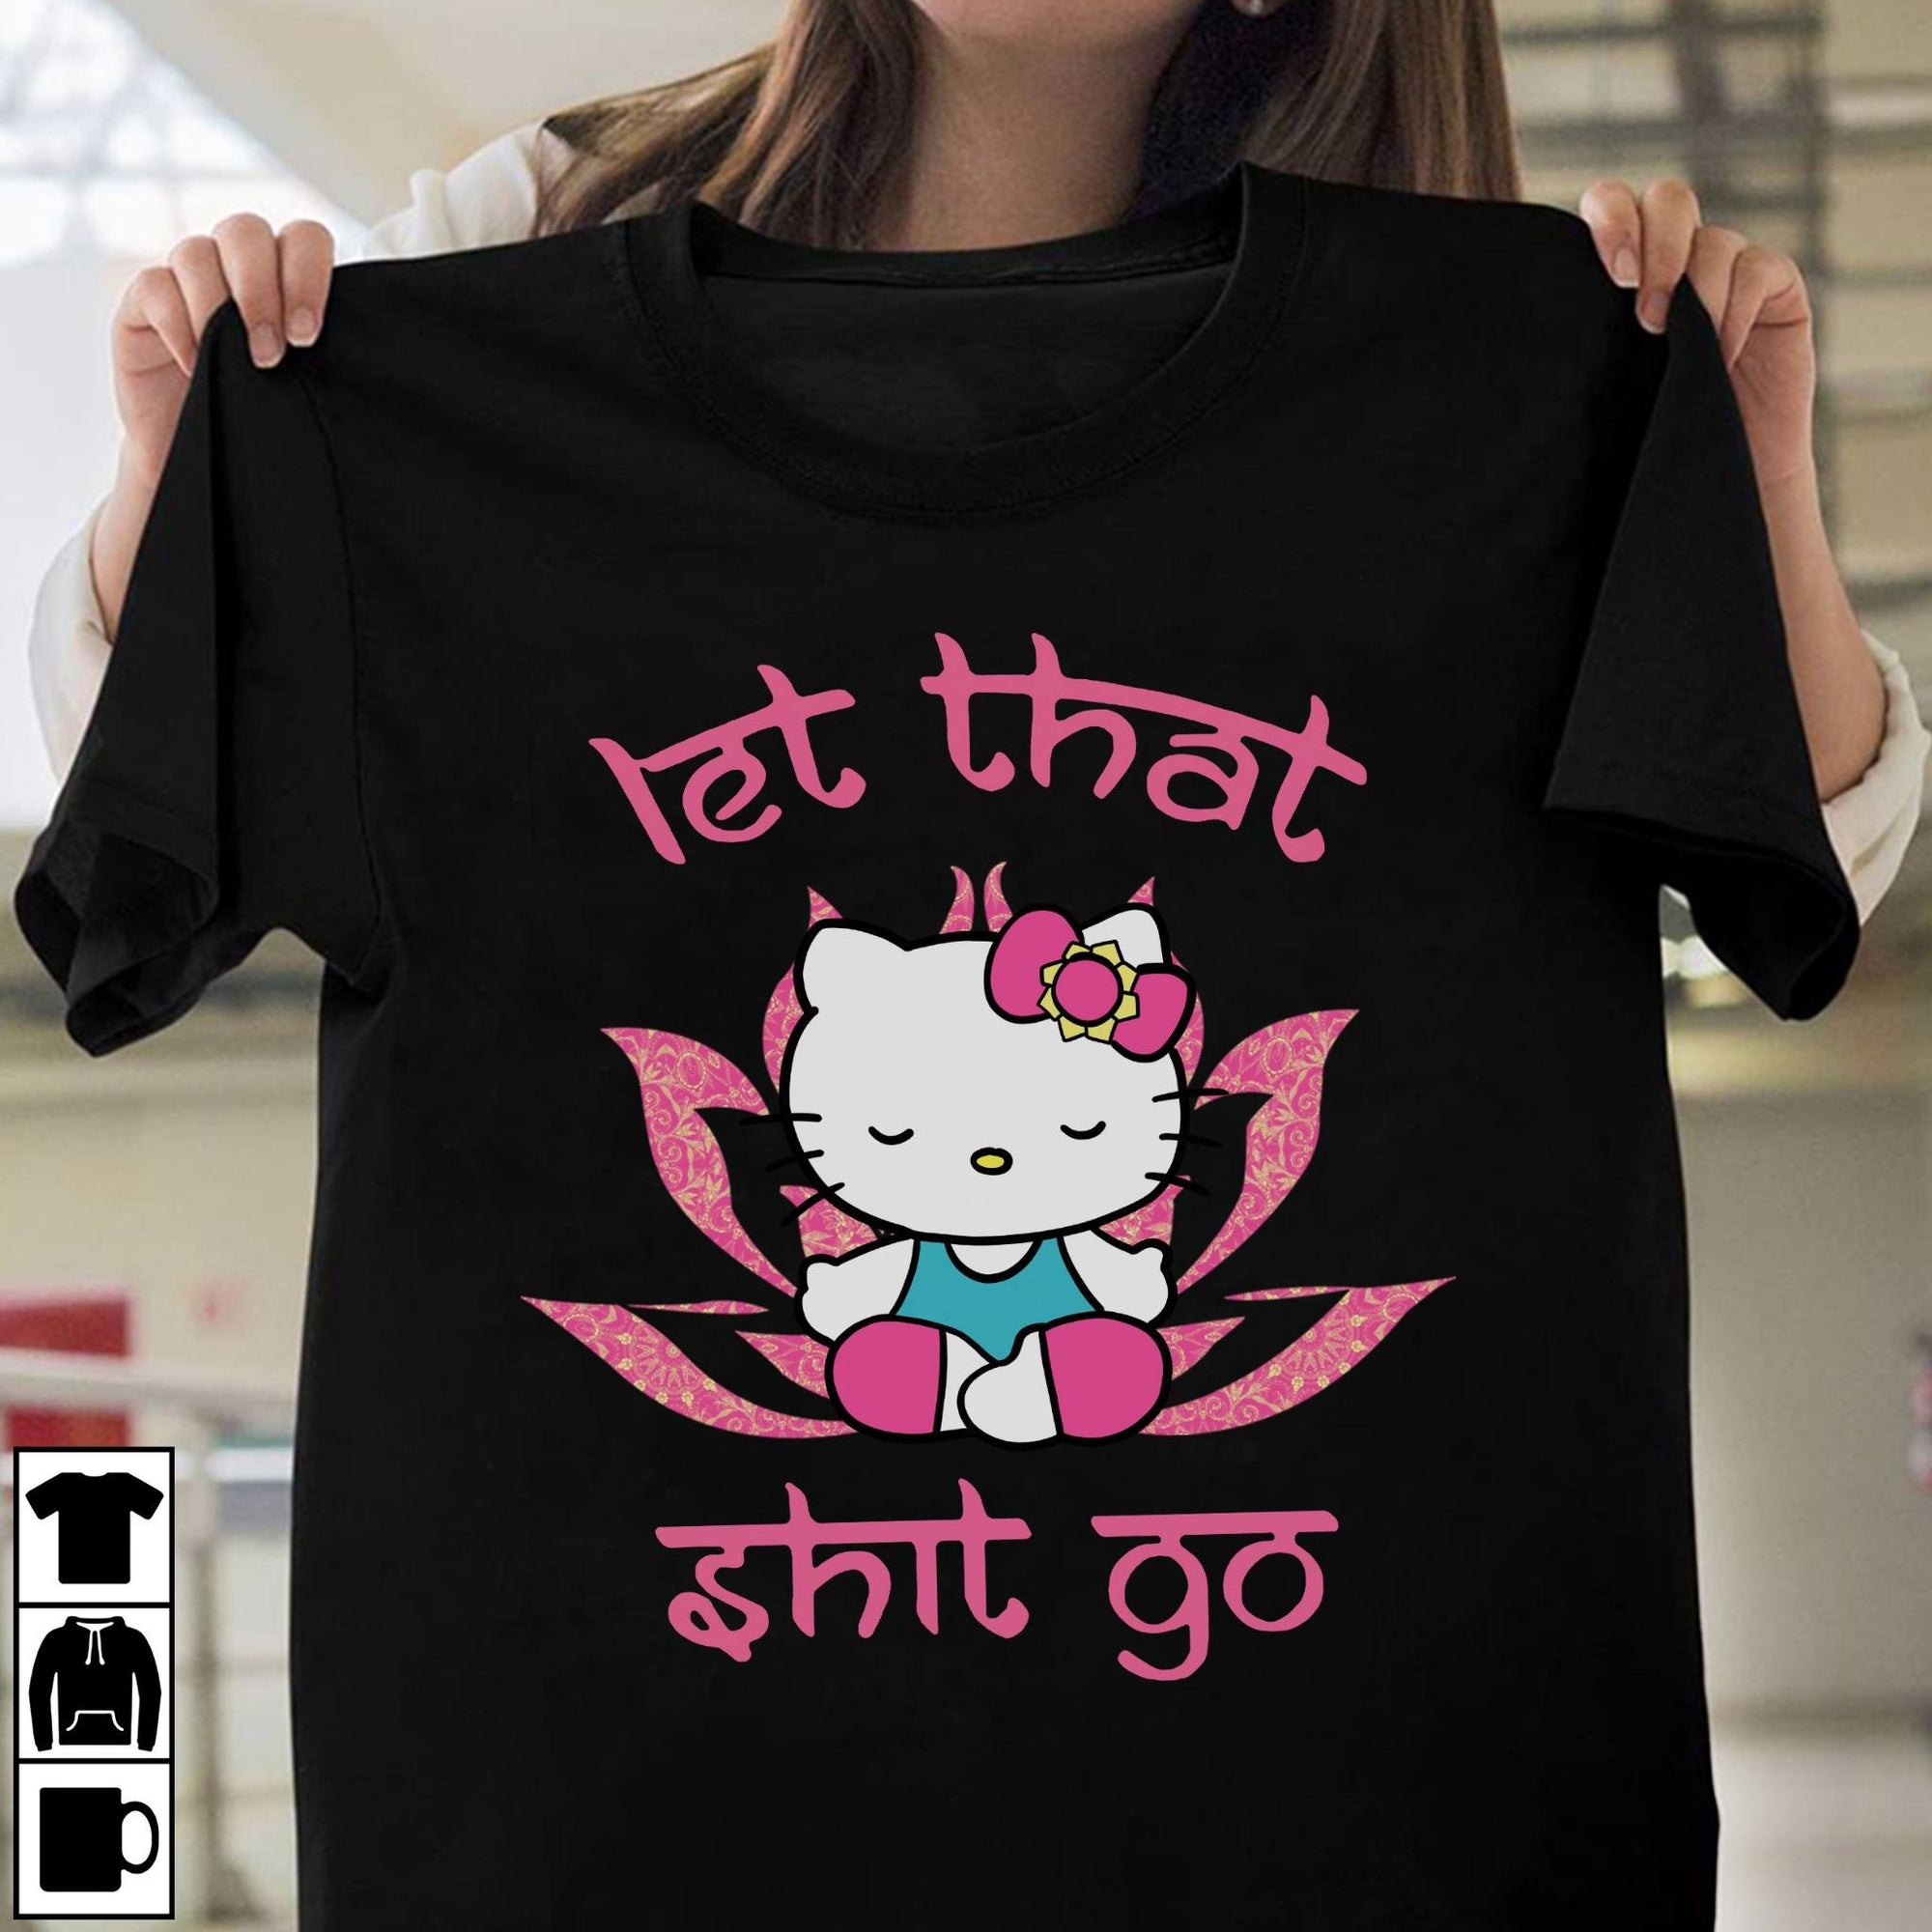 Let That Go White Kitten T-shirt and Hoodie 0823